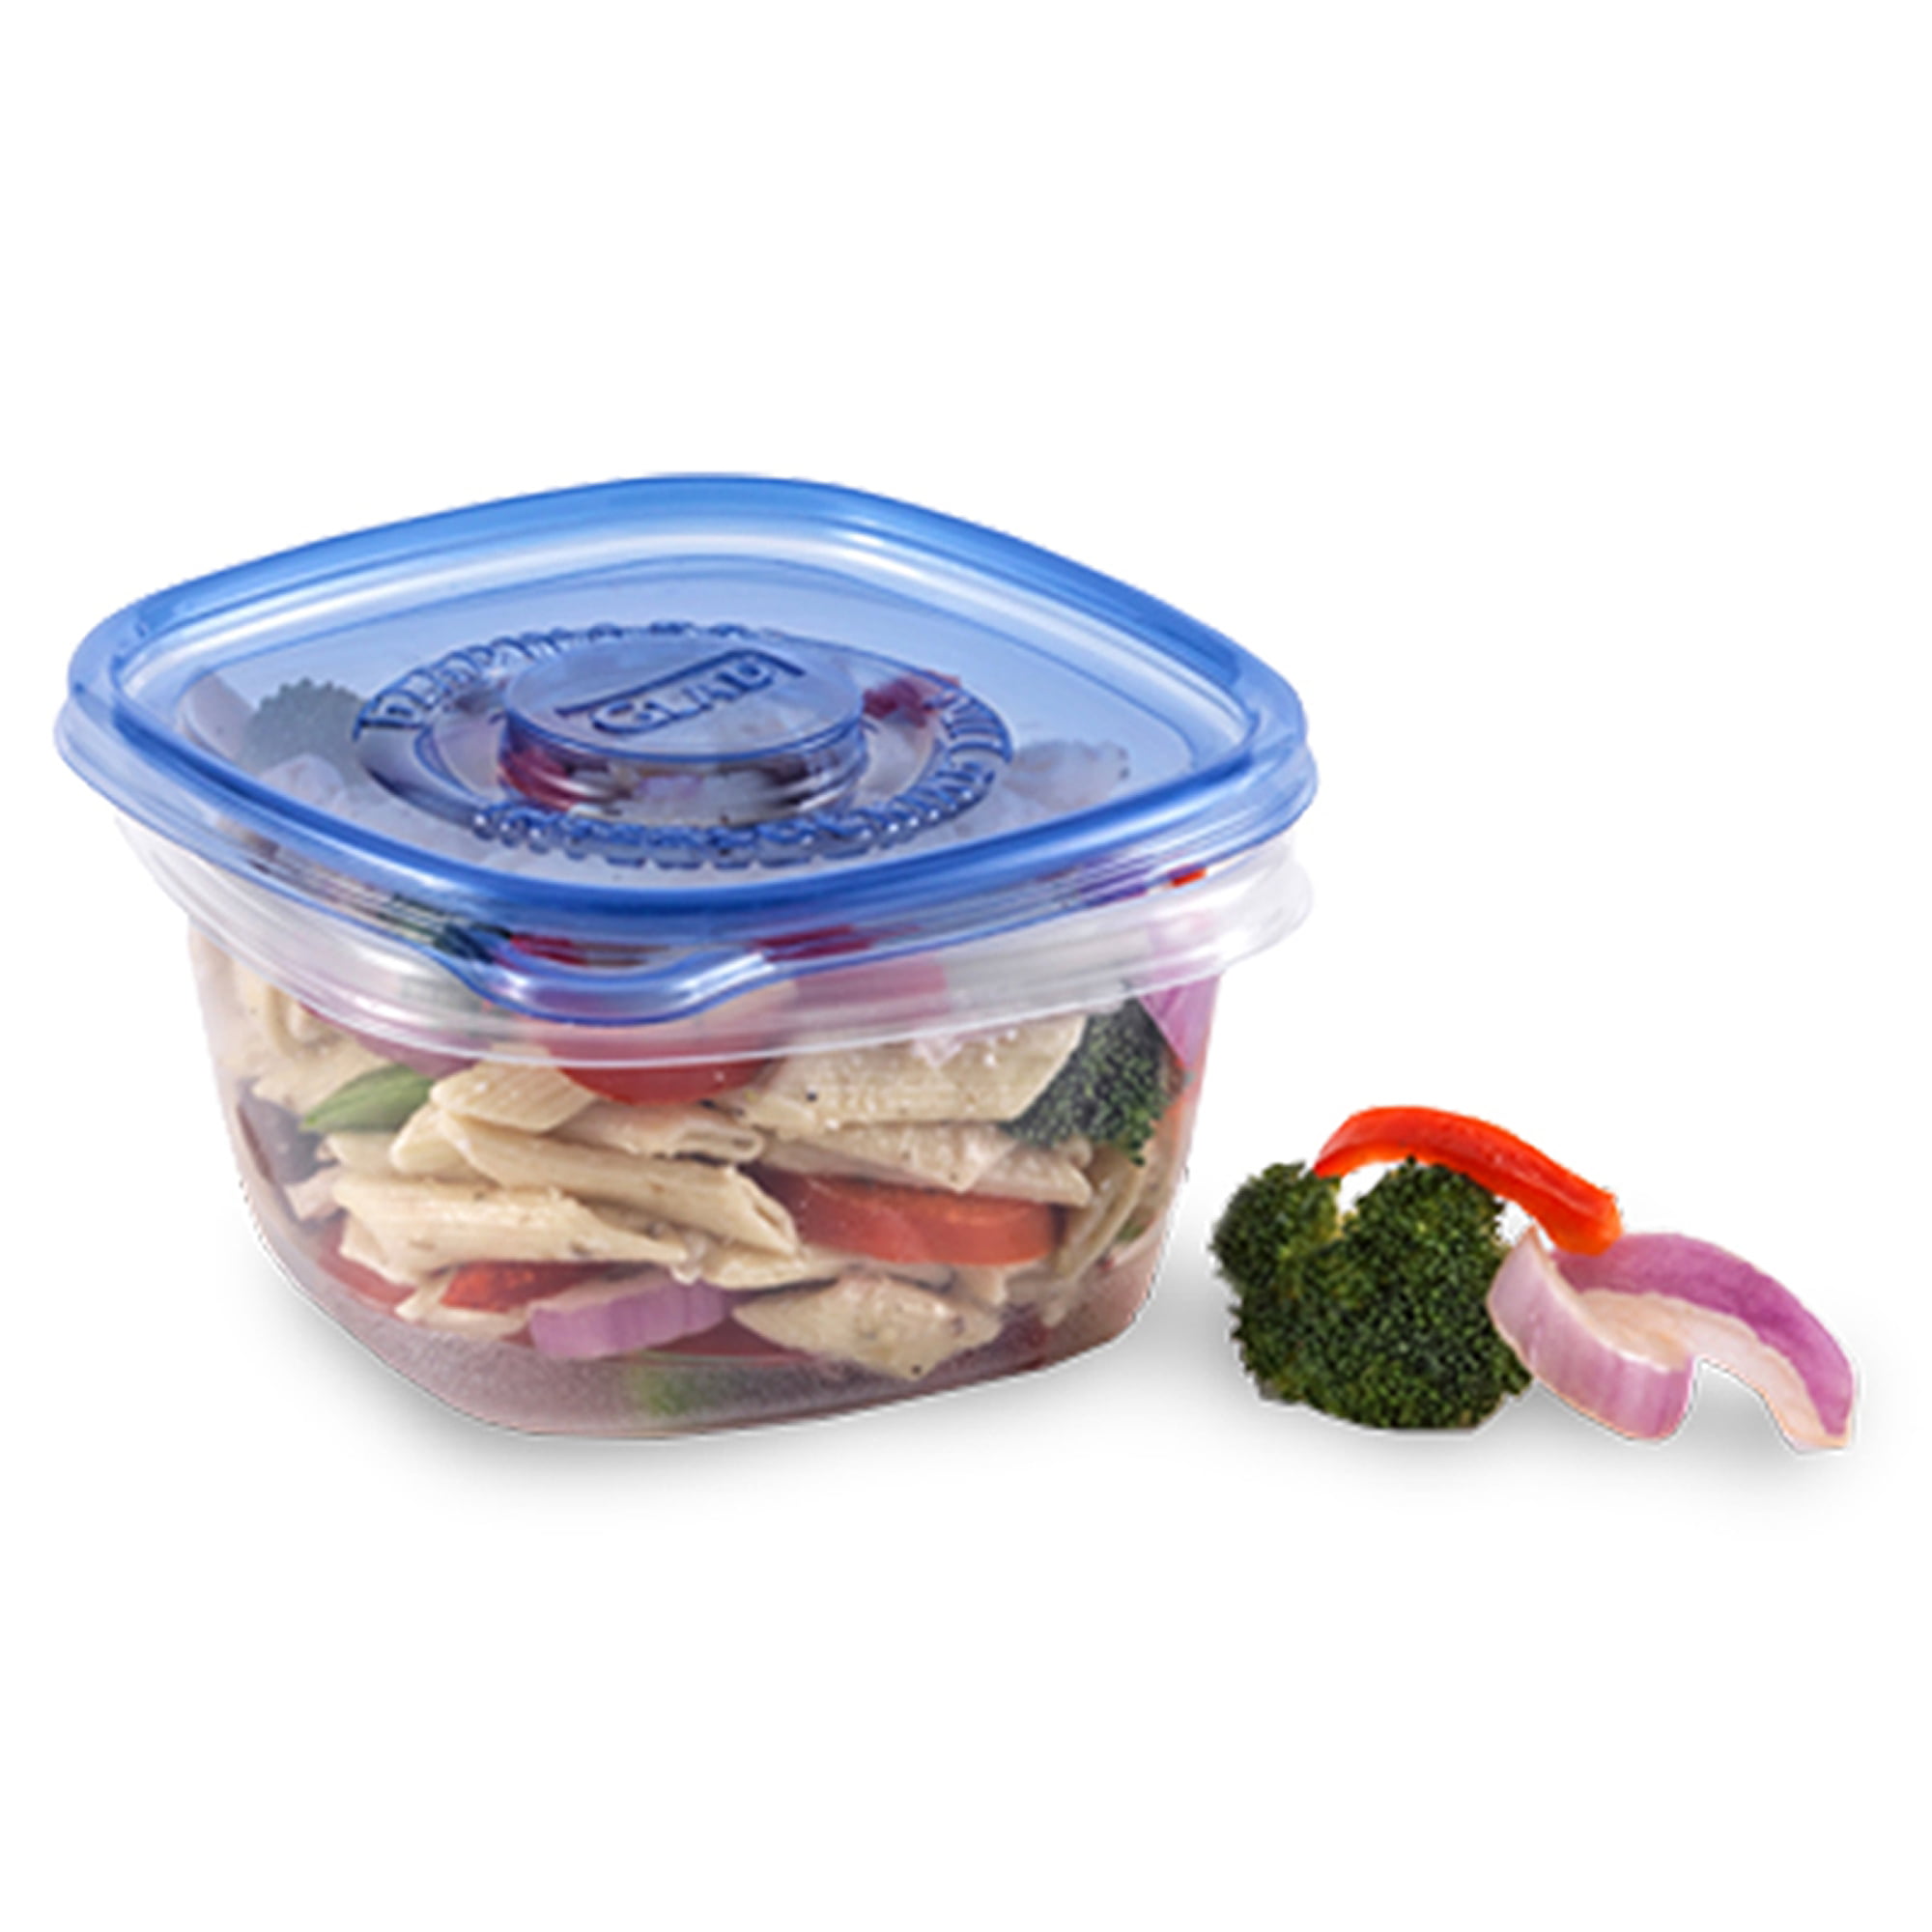 42 oz 3-Count Gladware Tall Entree Container 